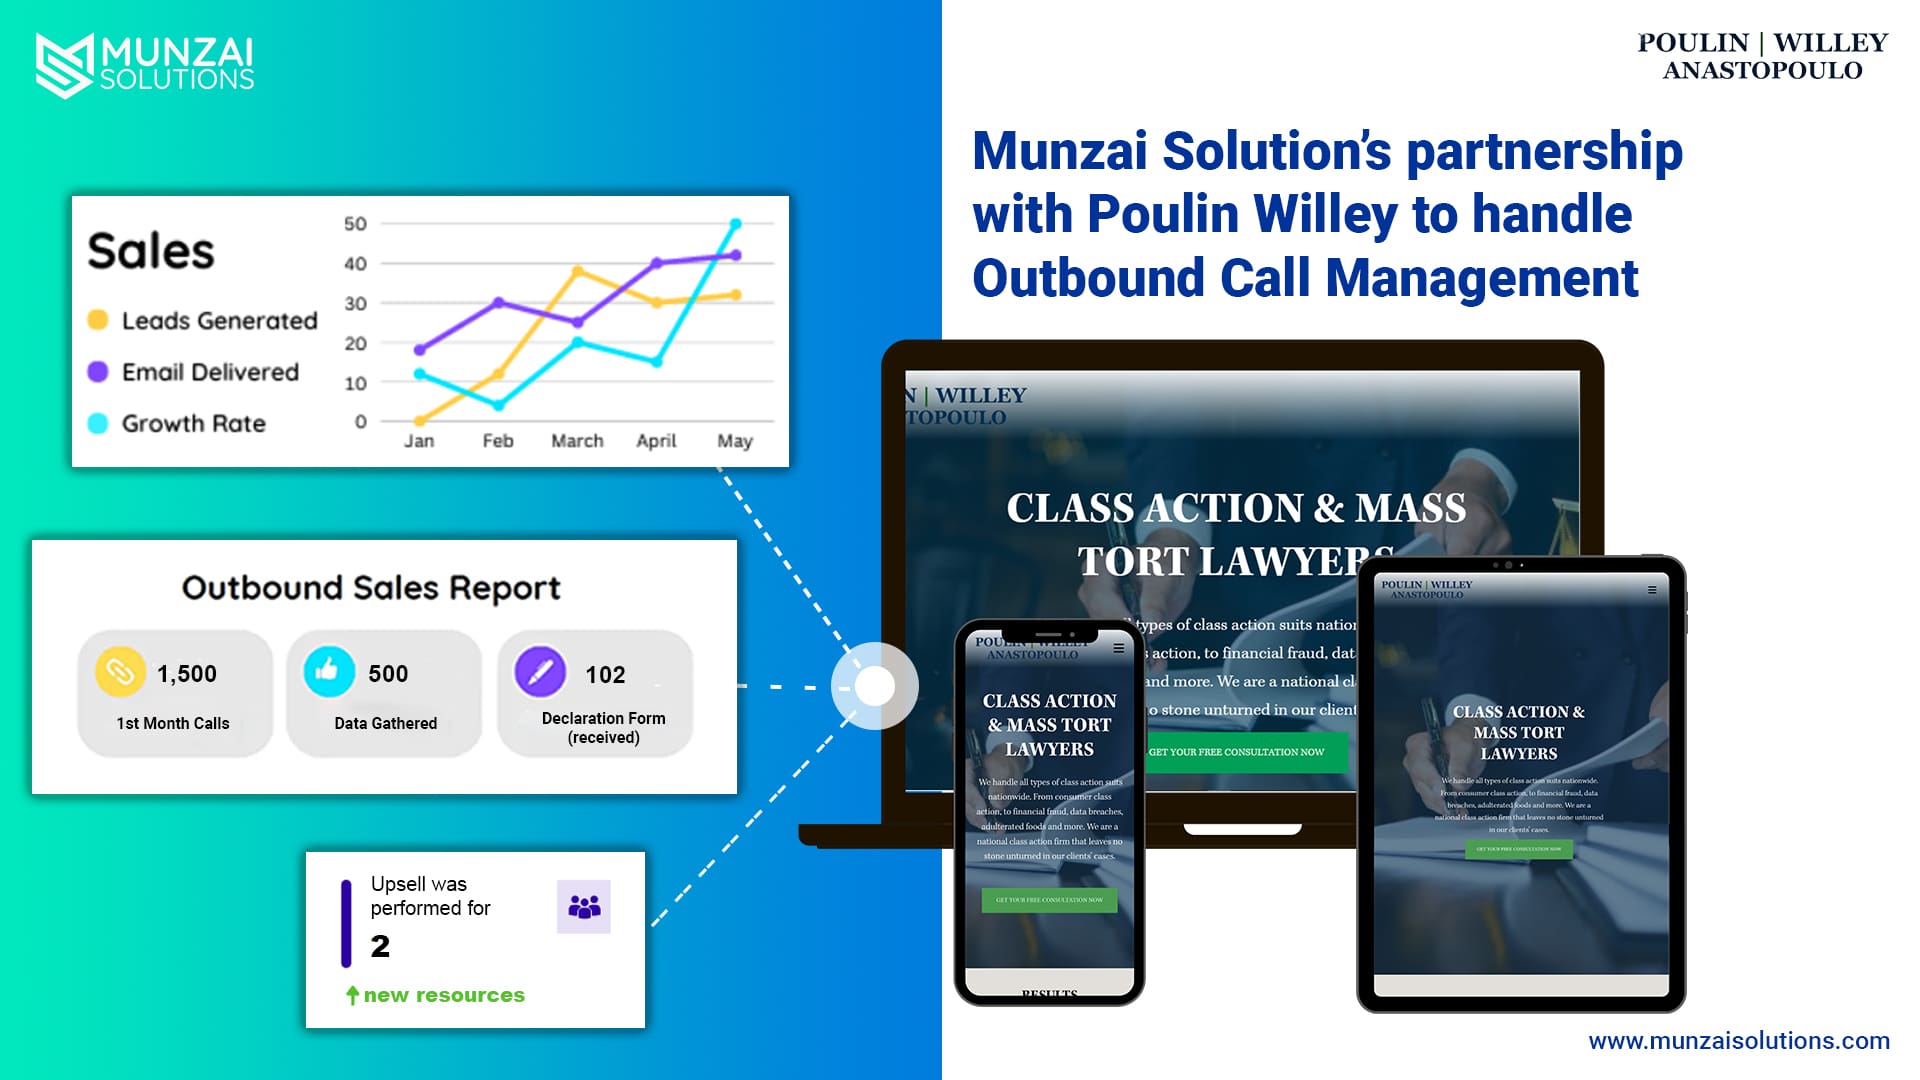 Poulin Willey and Munzai Solutions Strategic Partnership